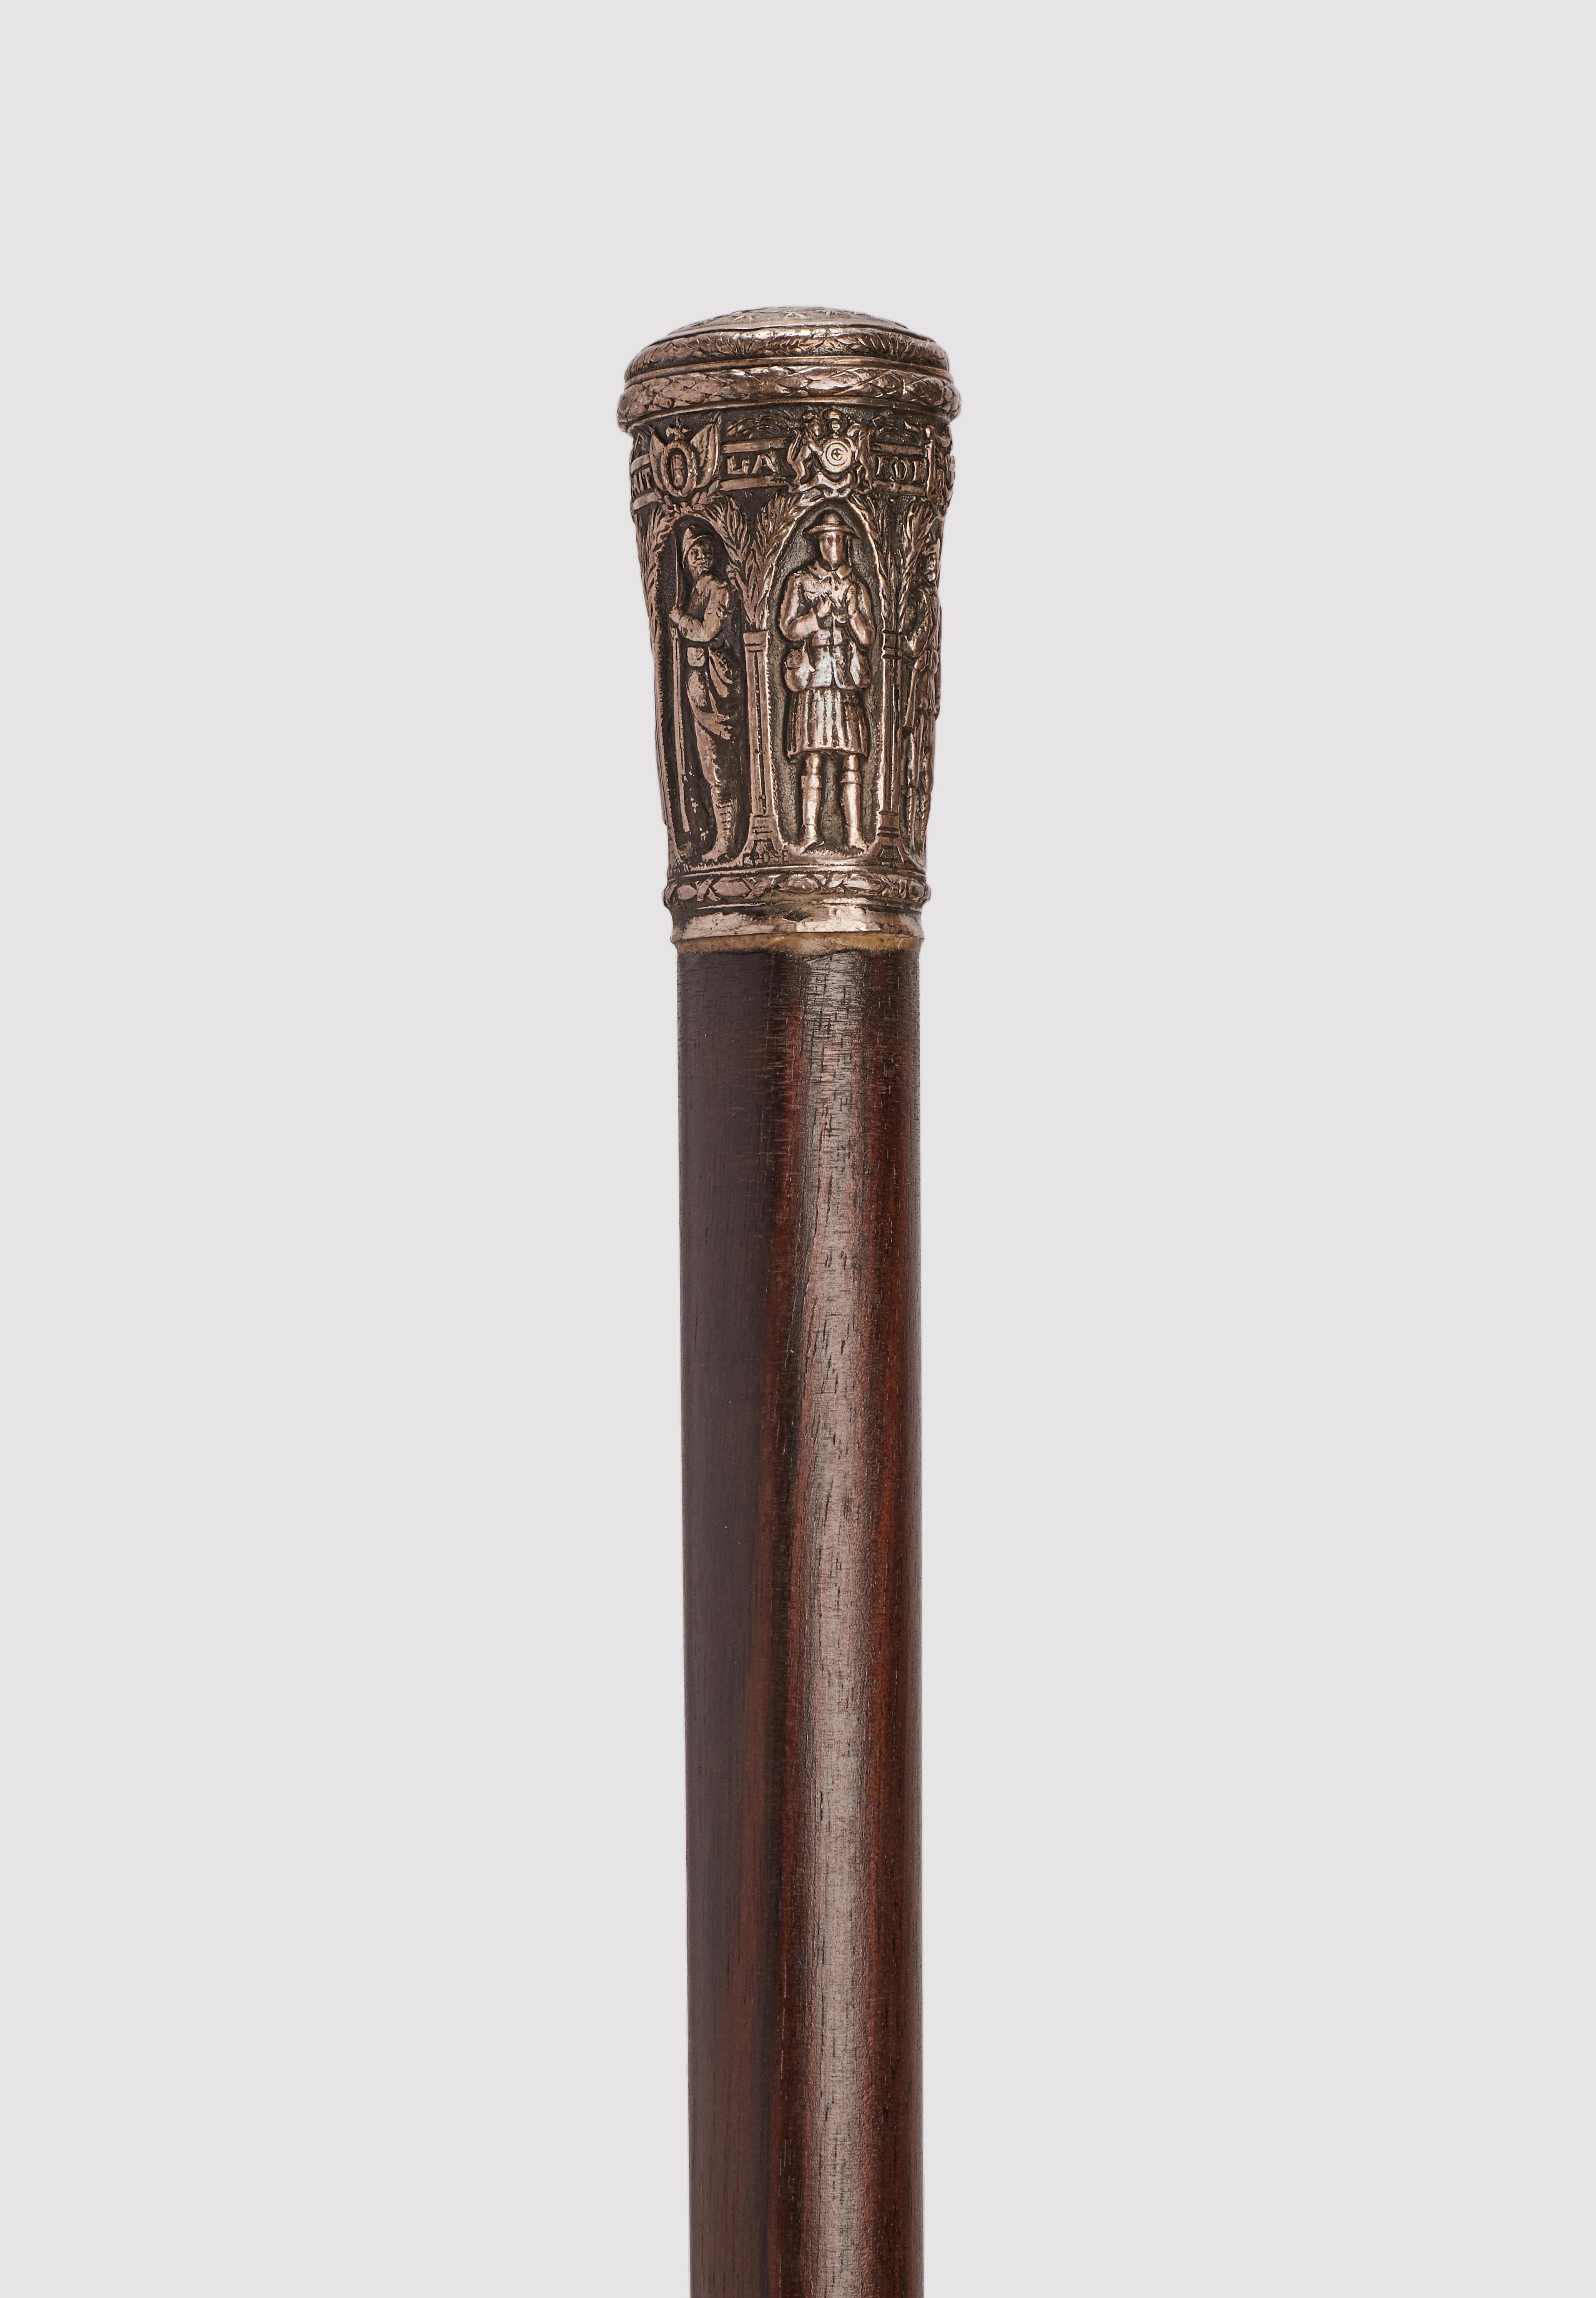 Walking stick: silver knob milord shape handle, depicting six soldiers, representing six European states involved in the First World War conflict. Ebony macassar wood shaft. Metal ferrule. France, 1915.